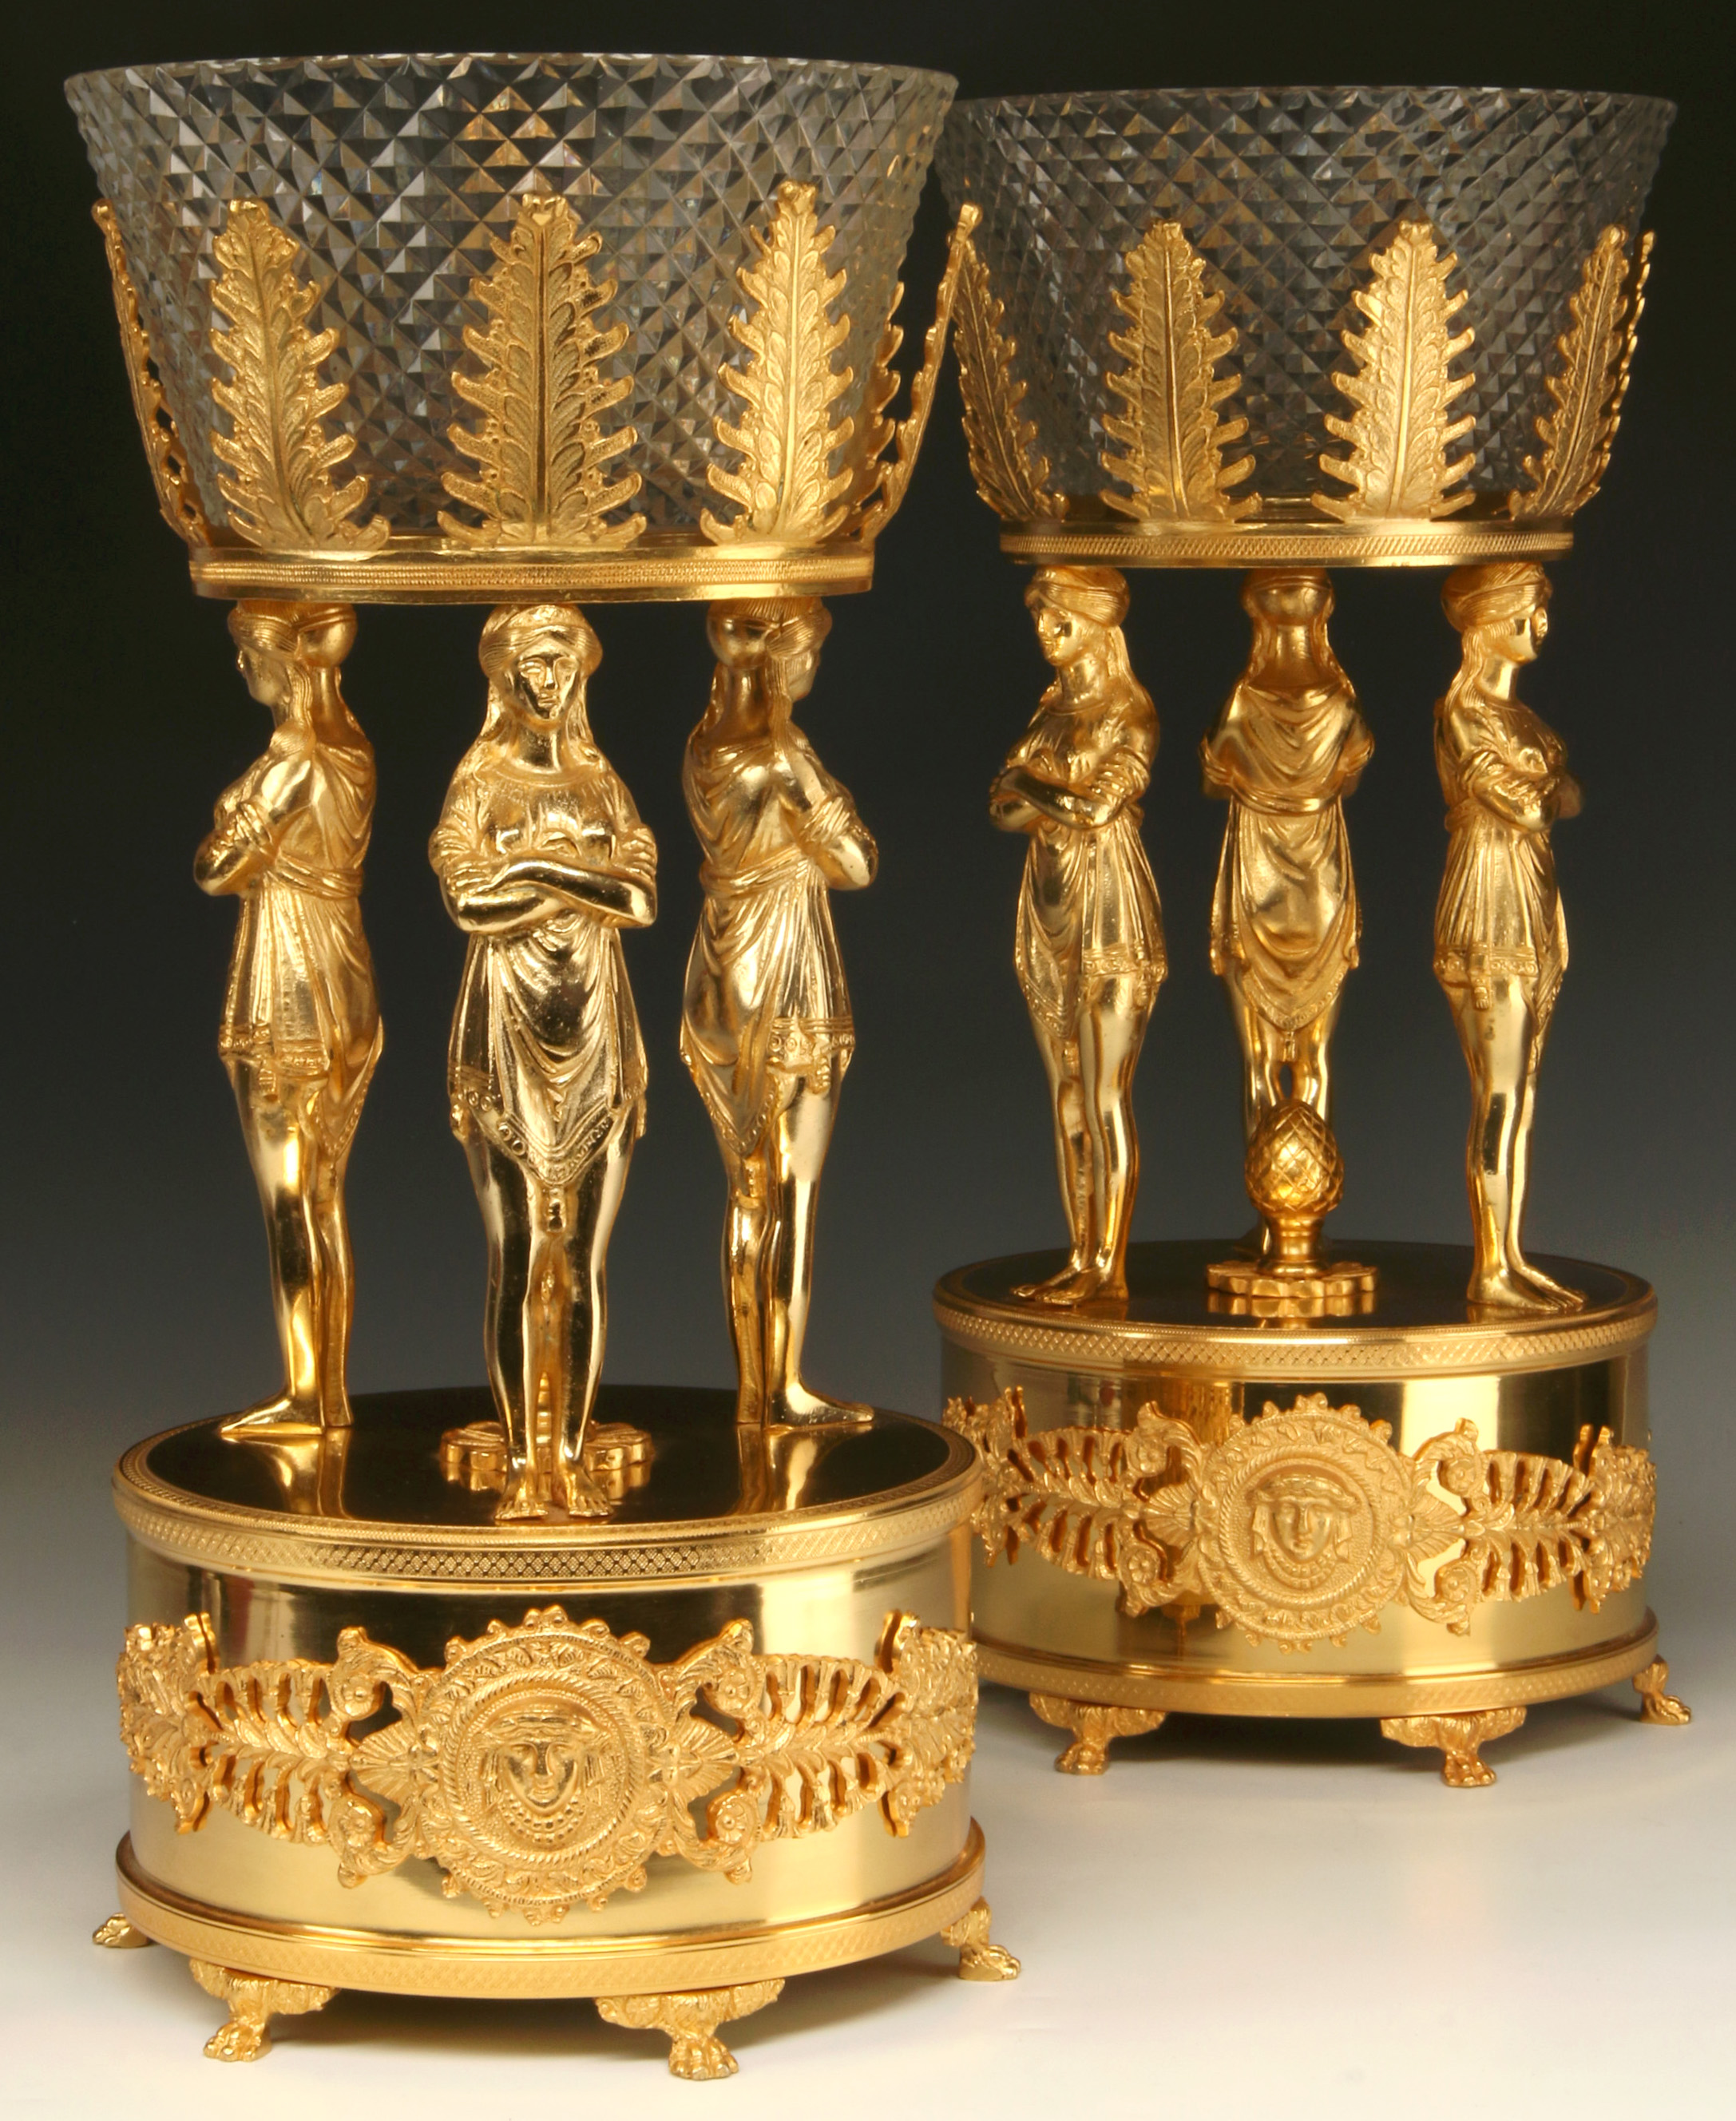 A PAIR OF 20TH C. FRENCH EMPIRE STYLE FIGURAL BASK